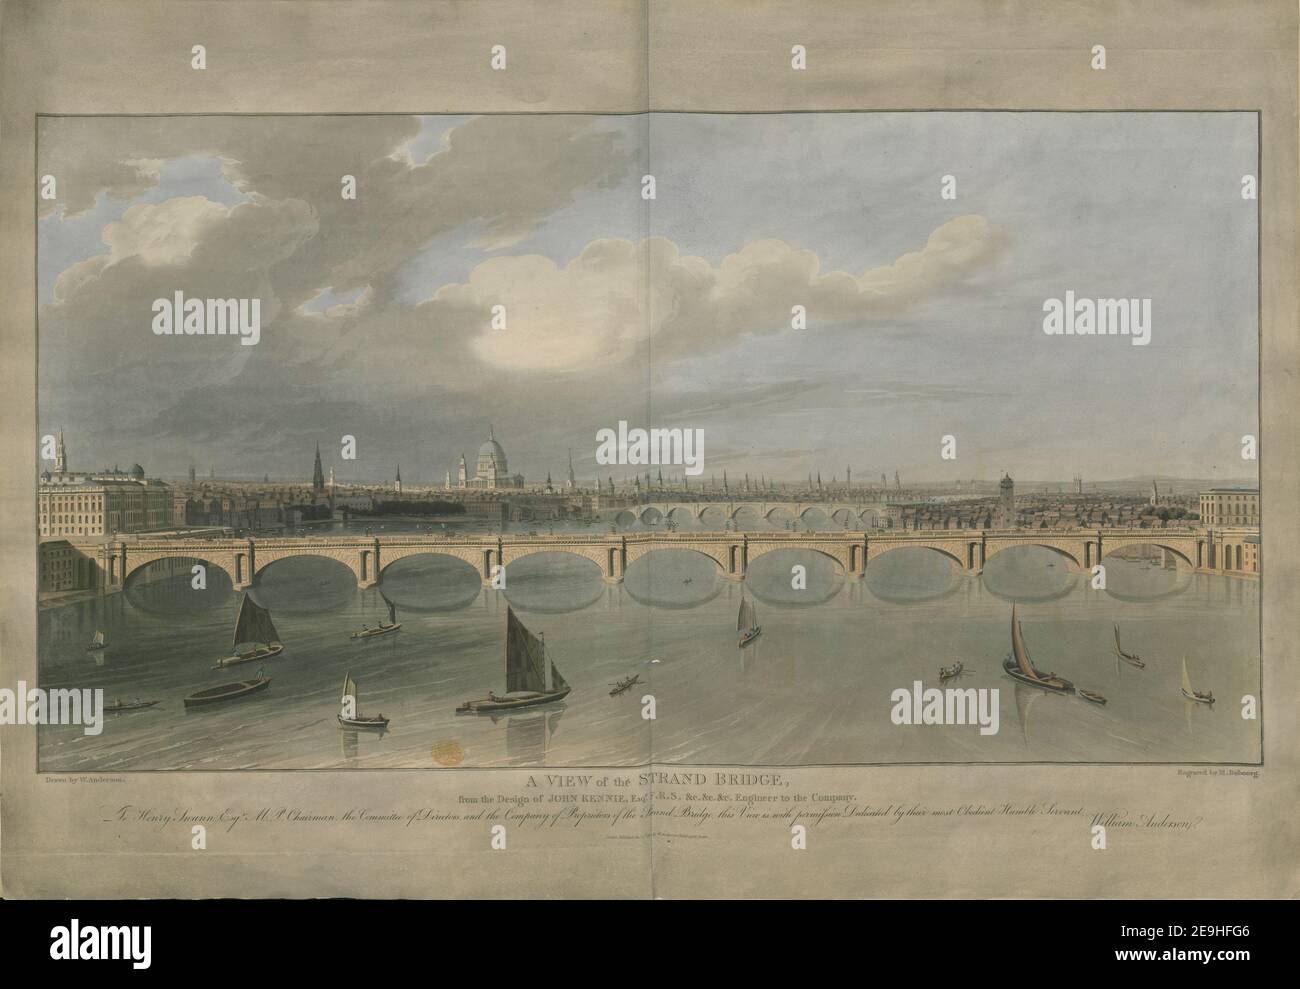 A VIEW of the STRAND BRIDGE from the Design of JOHN RENNIE Esqr F.RS. &c. &c. &c. &c. Engineer to the Company.  Author  Dubourg, Matthew 22.40.a. Place of publication: London Publisher: Published Decr 5th 1811 by W. Anderson Paddington Green., Date of publication: [December 5 1811]  Item type: 1 print Medium: aquatint and etching with hand-colouring Dimensions: sheet 59.3 x 86.1 cm  Former owner: George III, King of Great Britain, 1738-1820 Stock Photo